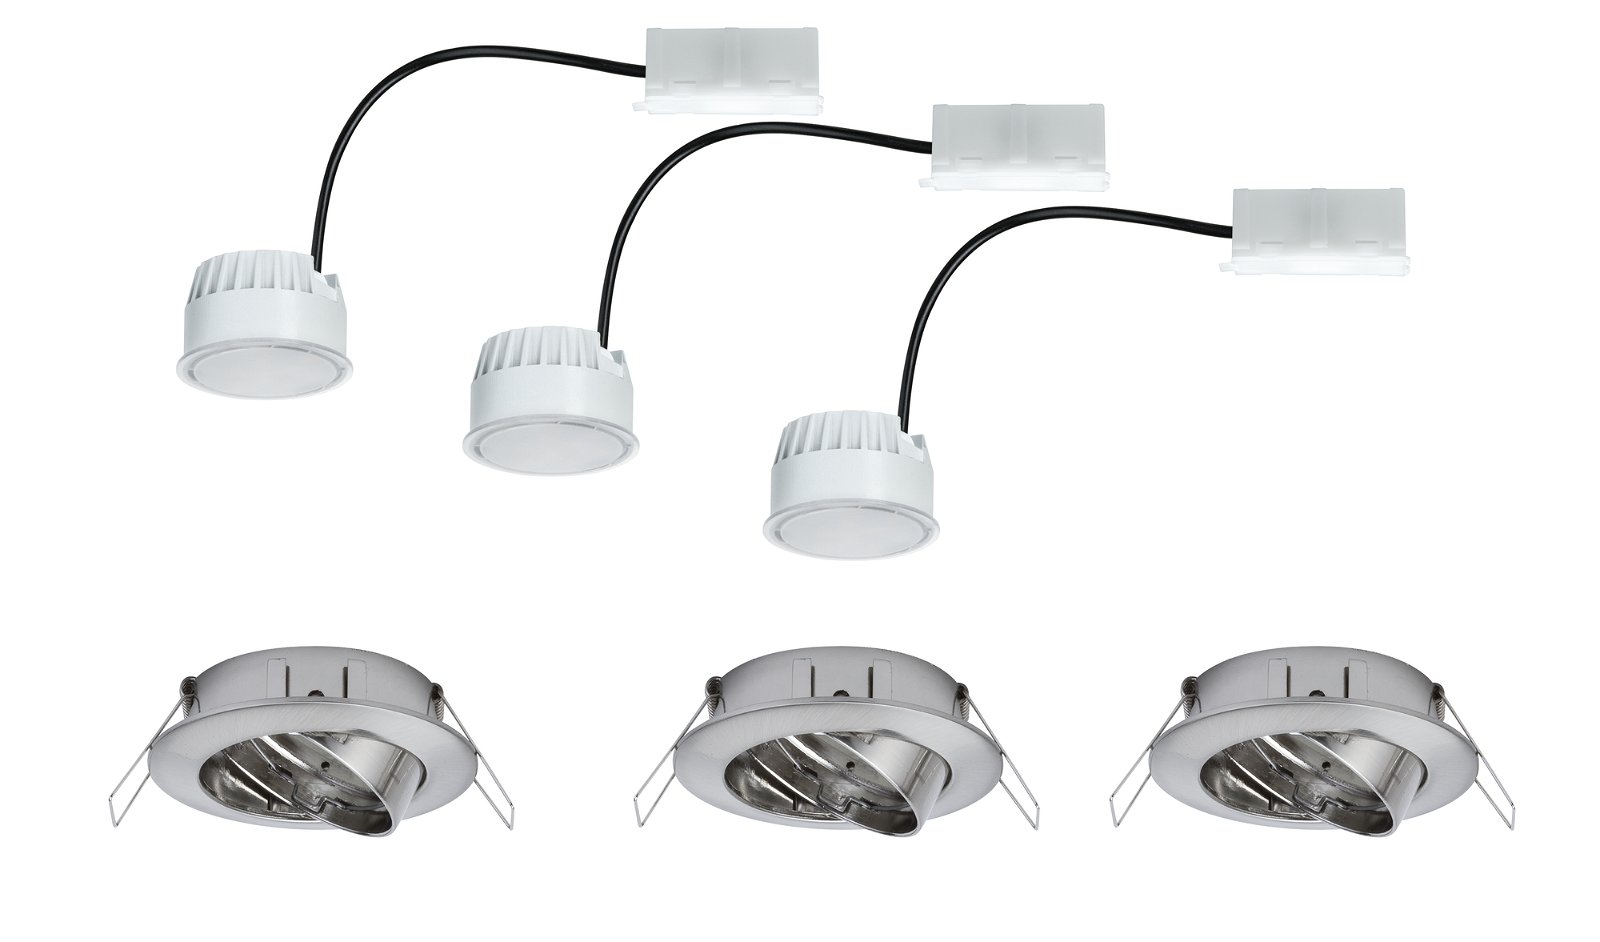 Recessed luminaire LED Coin satined round 6.8W iron 3-piece set, swivelling